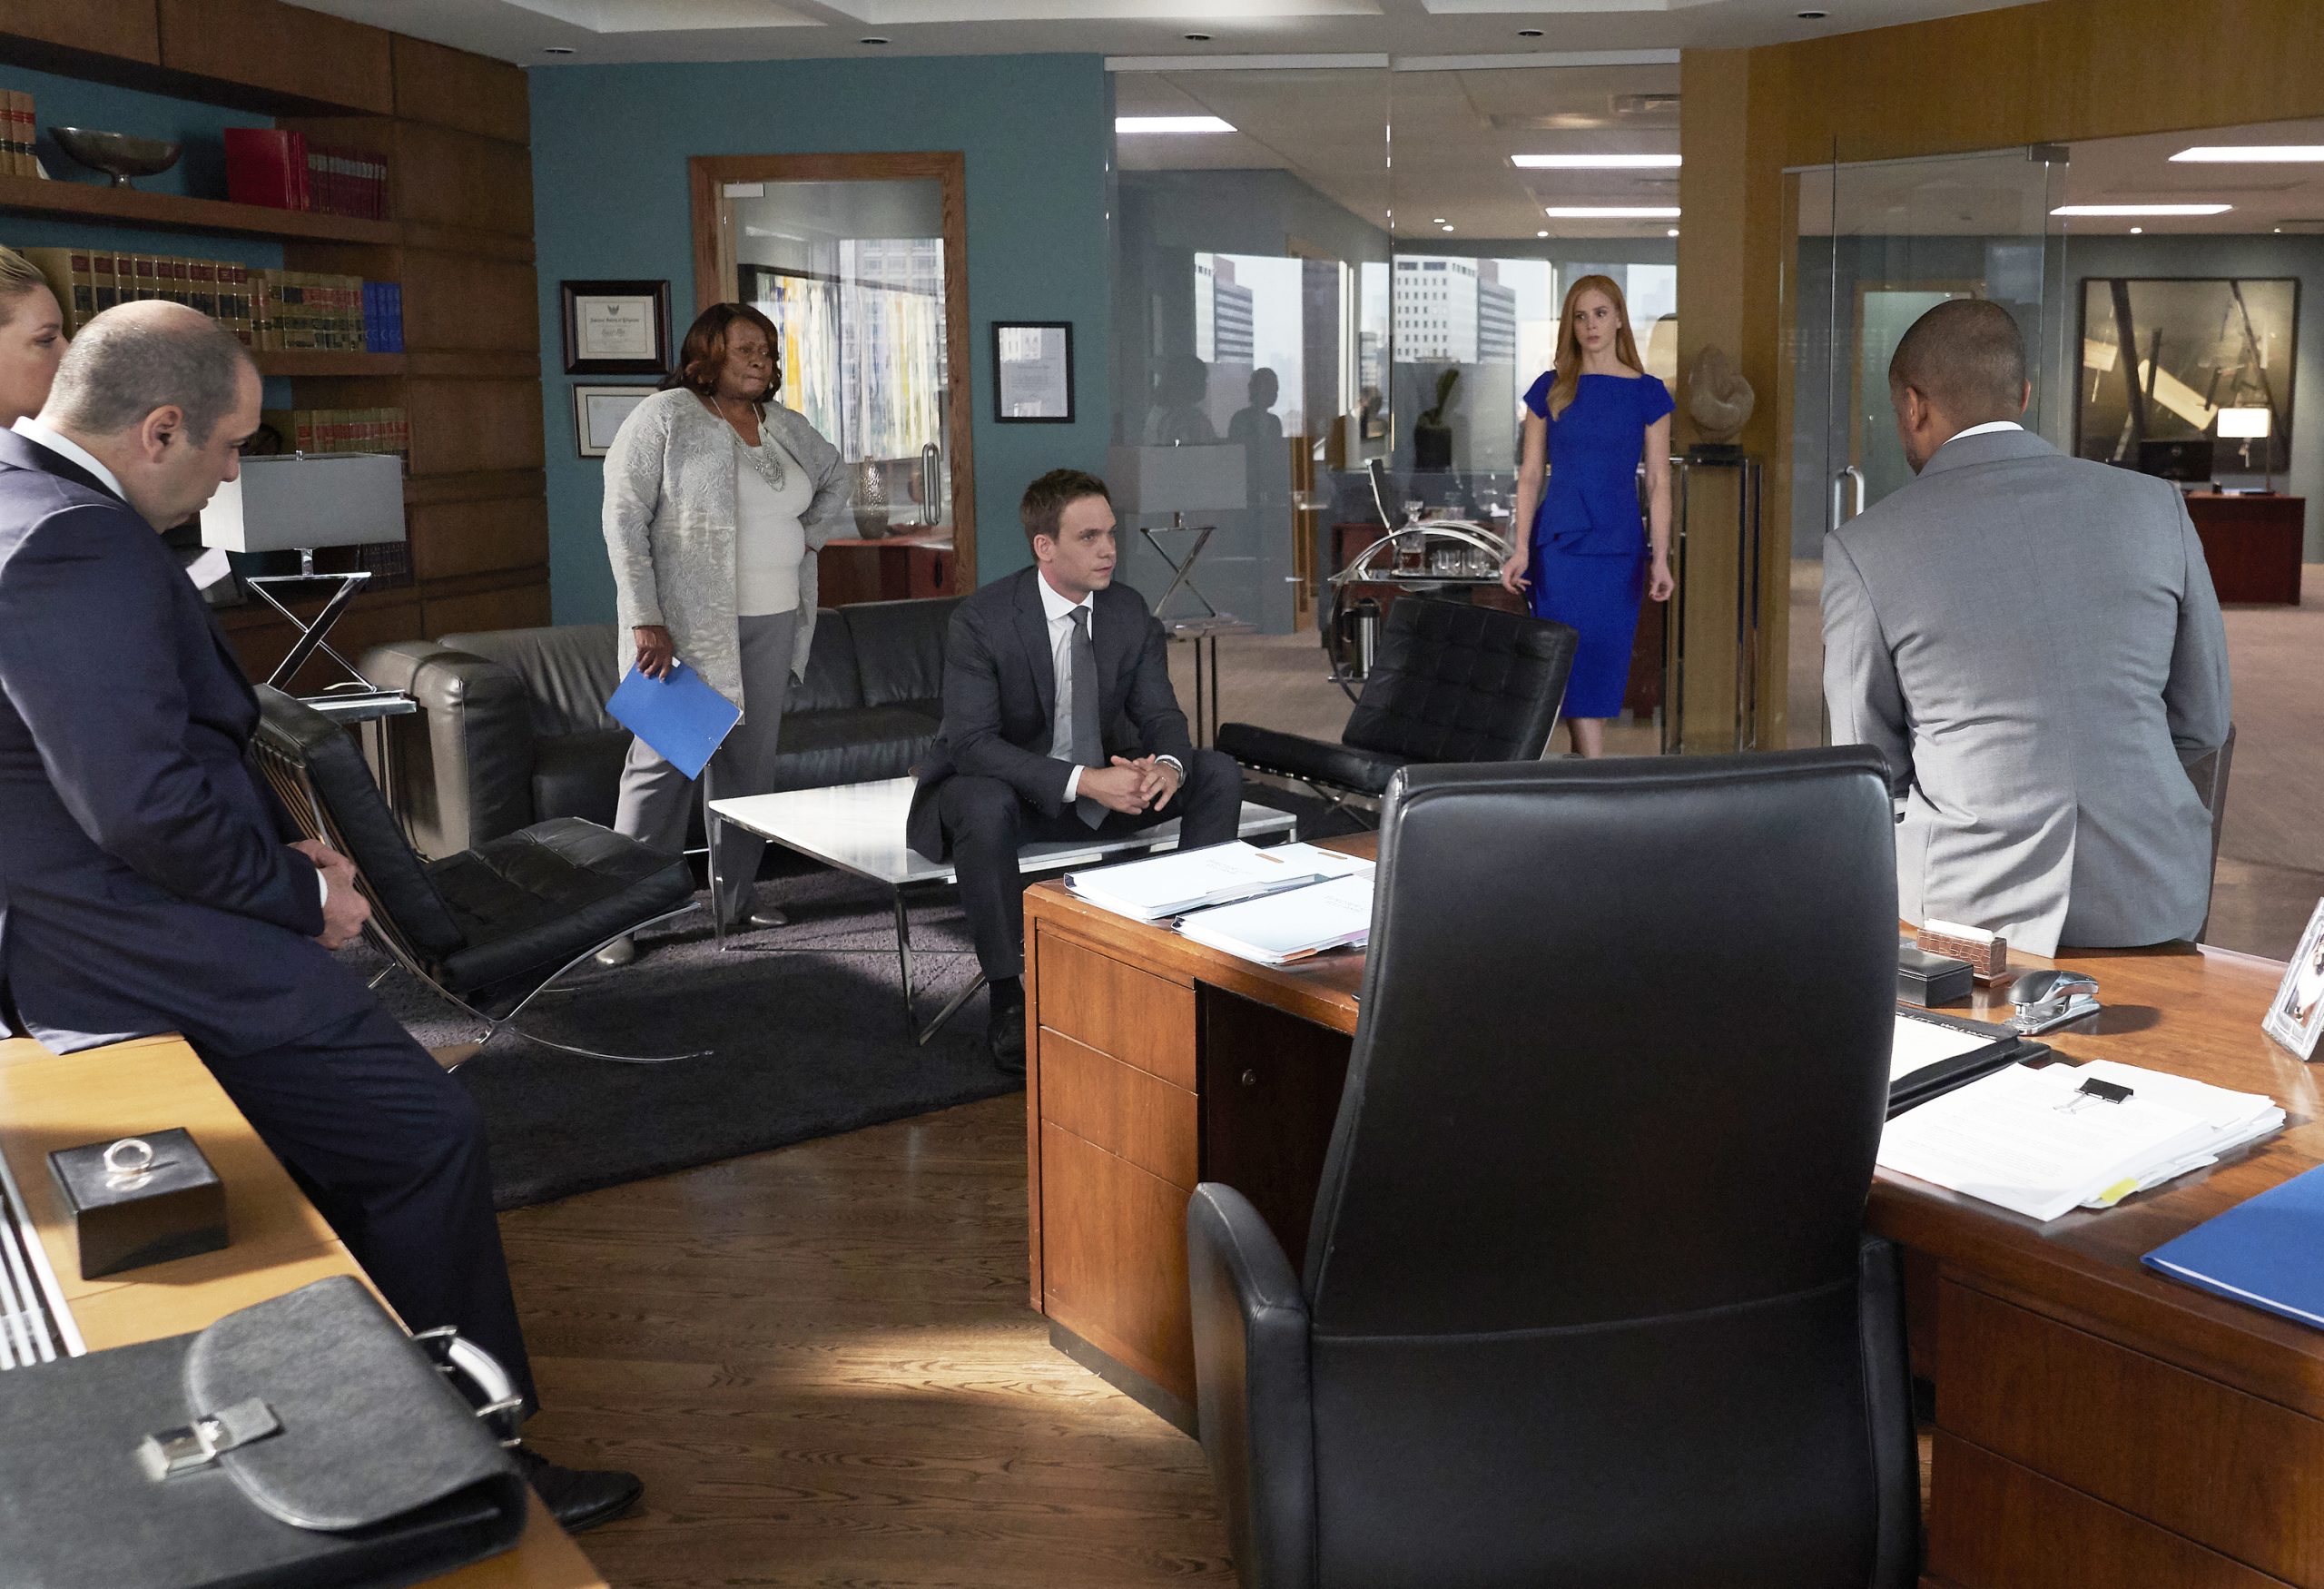 , Suits: &#8216;One Last Con&#8217; Sneak Peek Preview and Photos